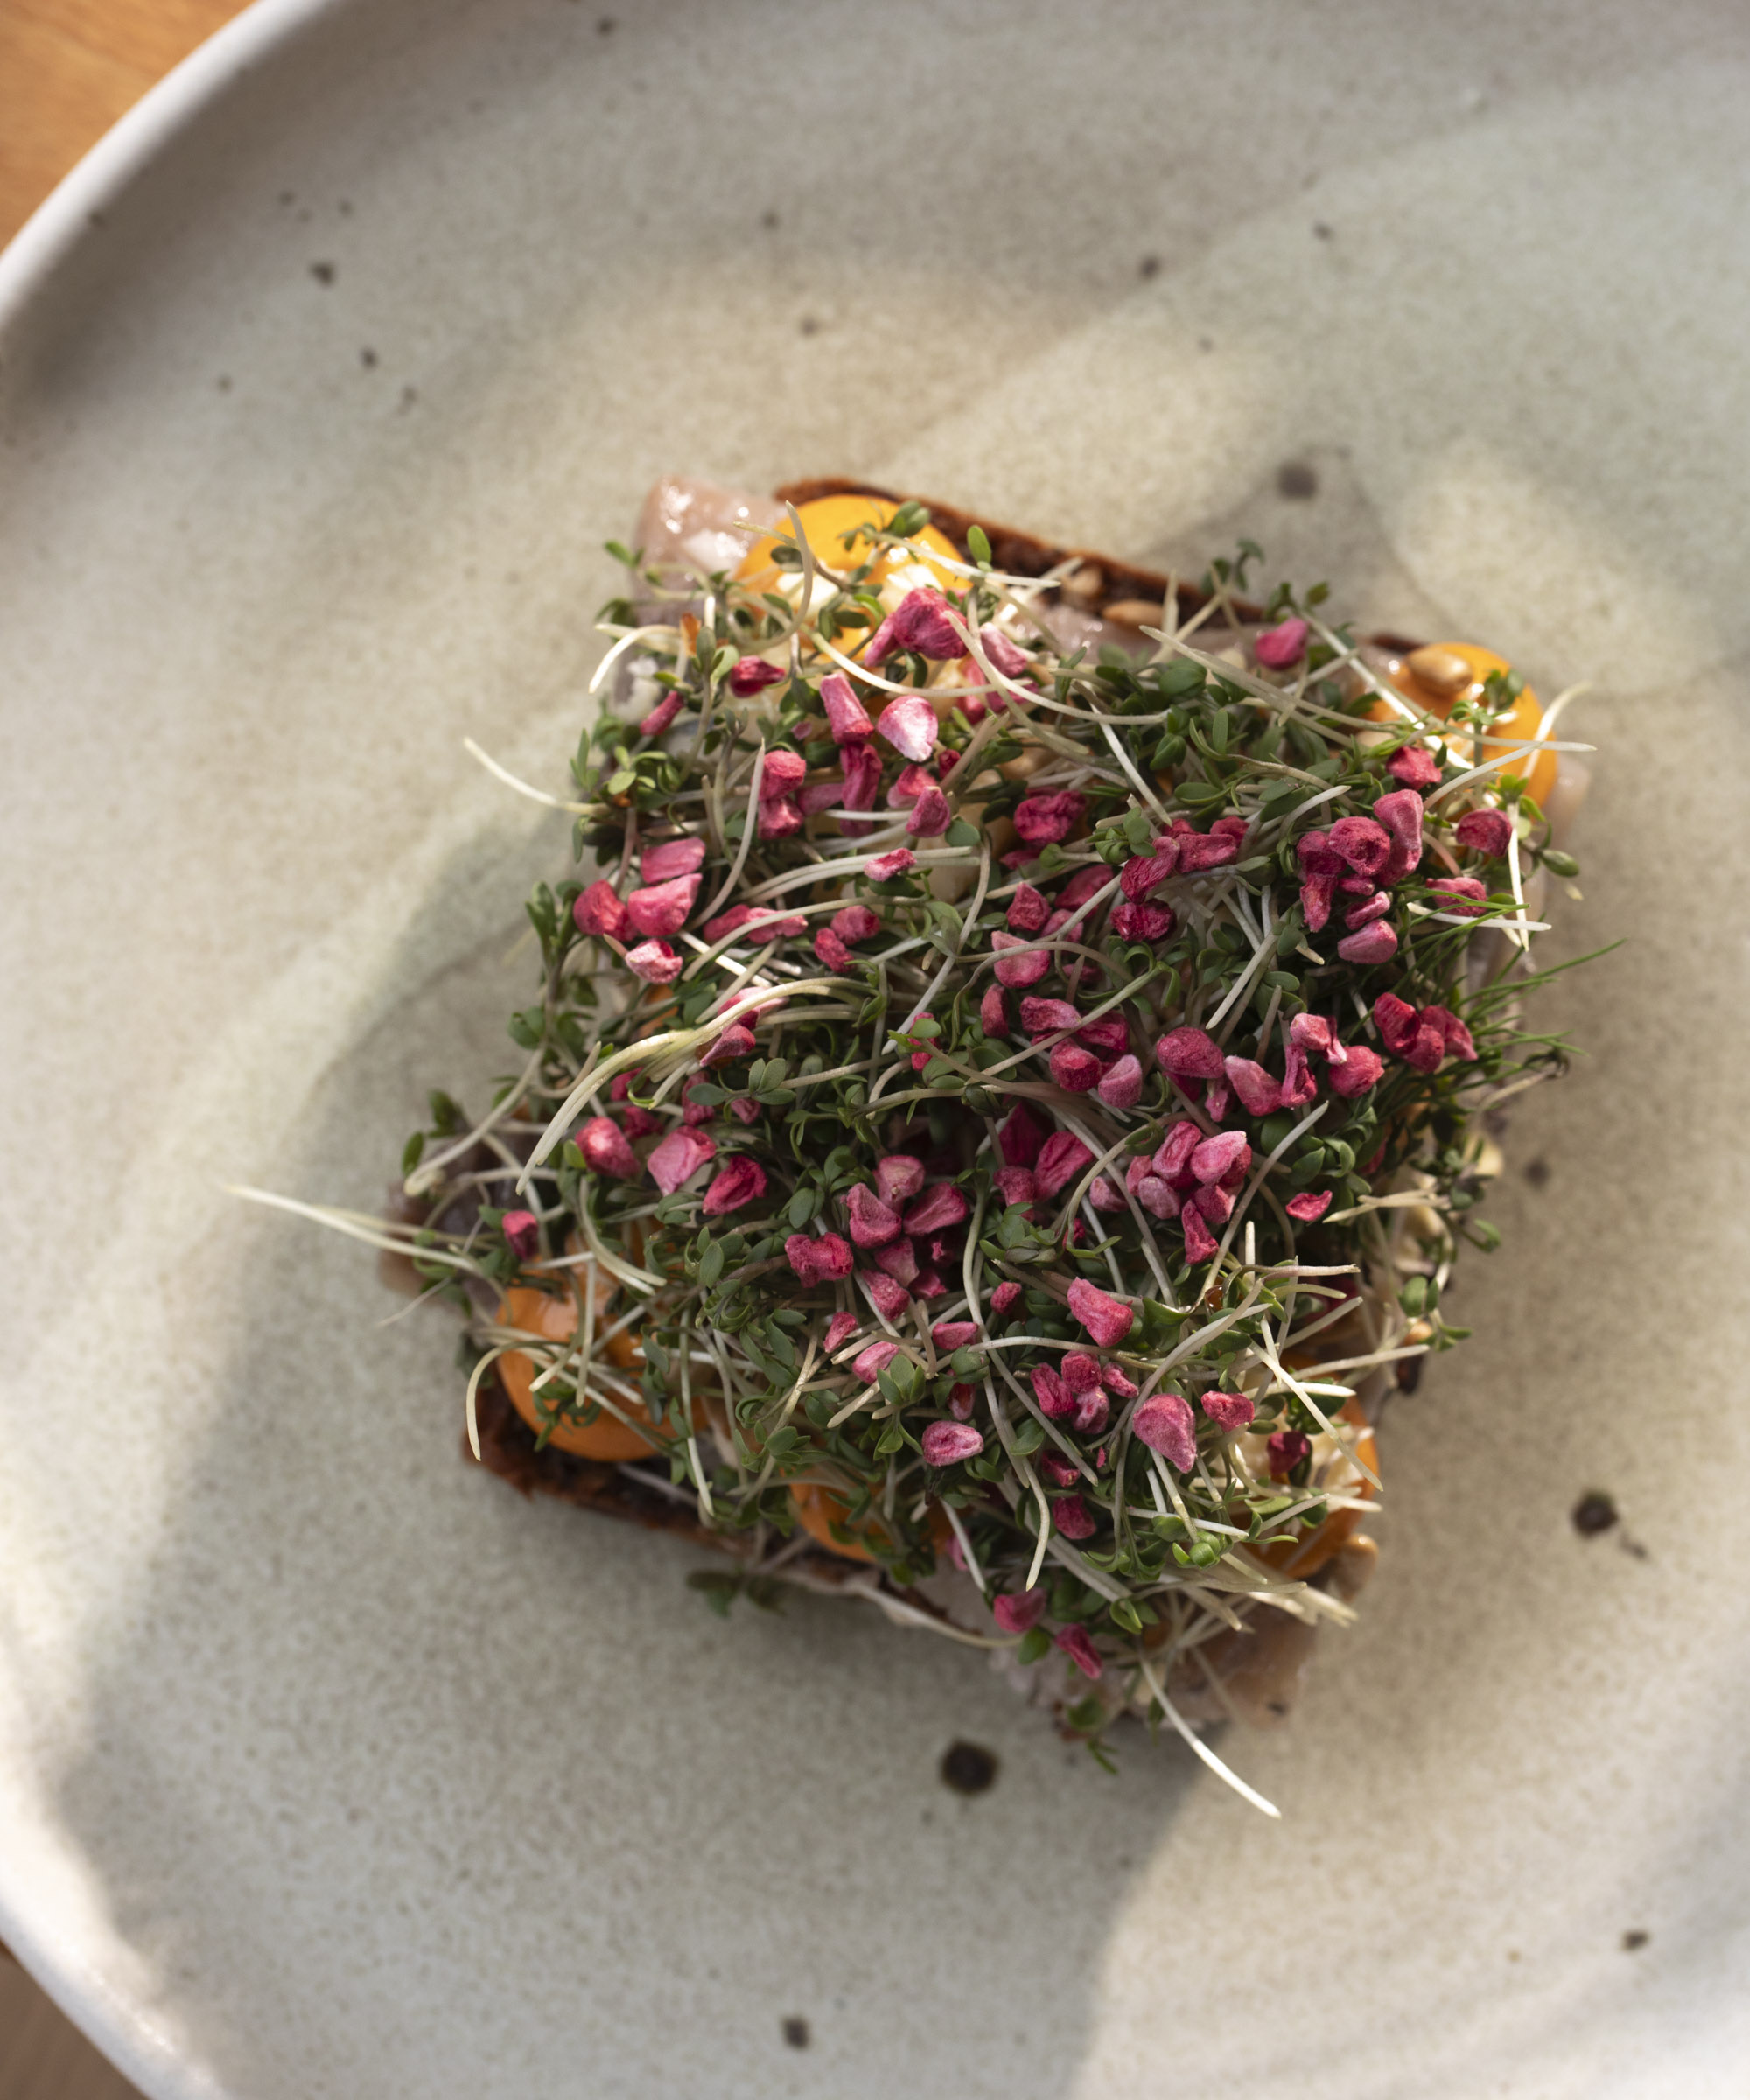 Two smørrebrød and a dessert at Judie – Their ingenious twists on traditional smørrebrød are making waves in Nyhavn, earning 5 stars in Berlingske and 5 hearts in Politiken